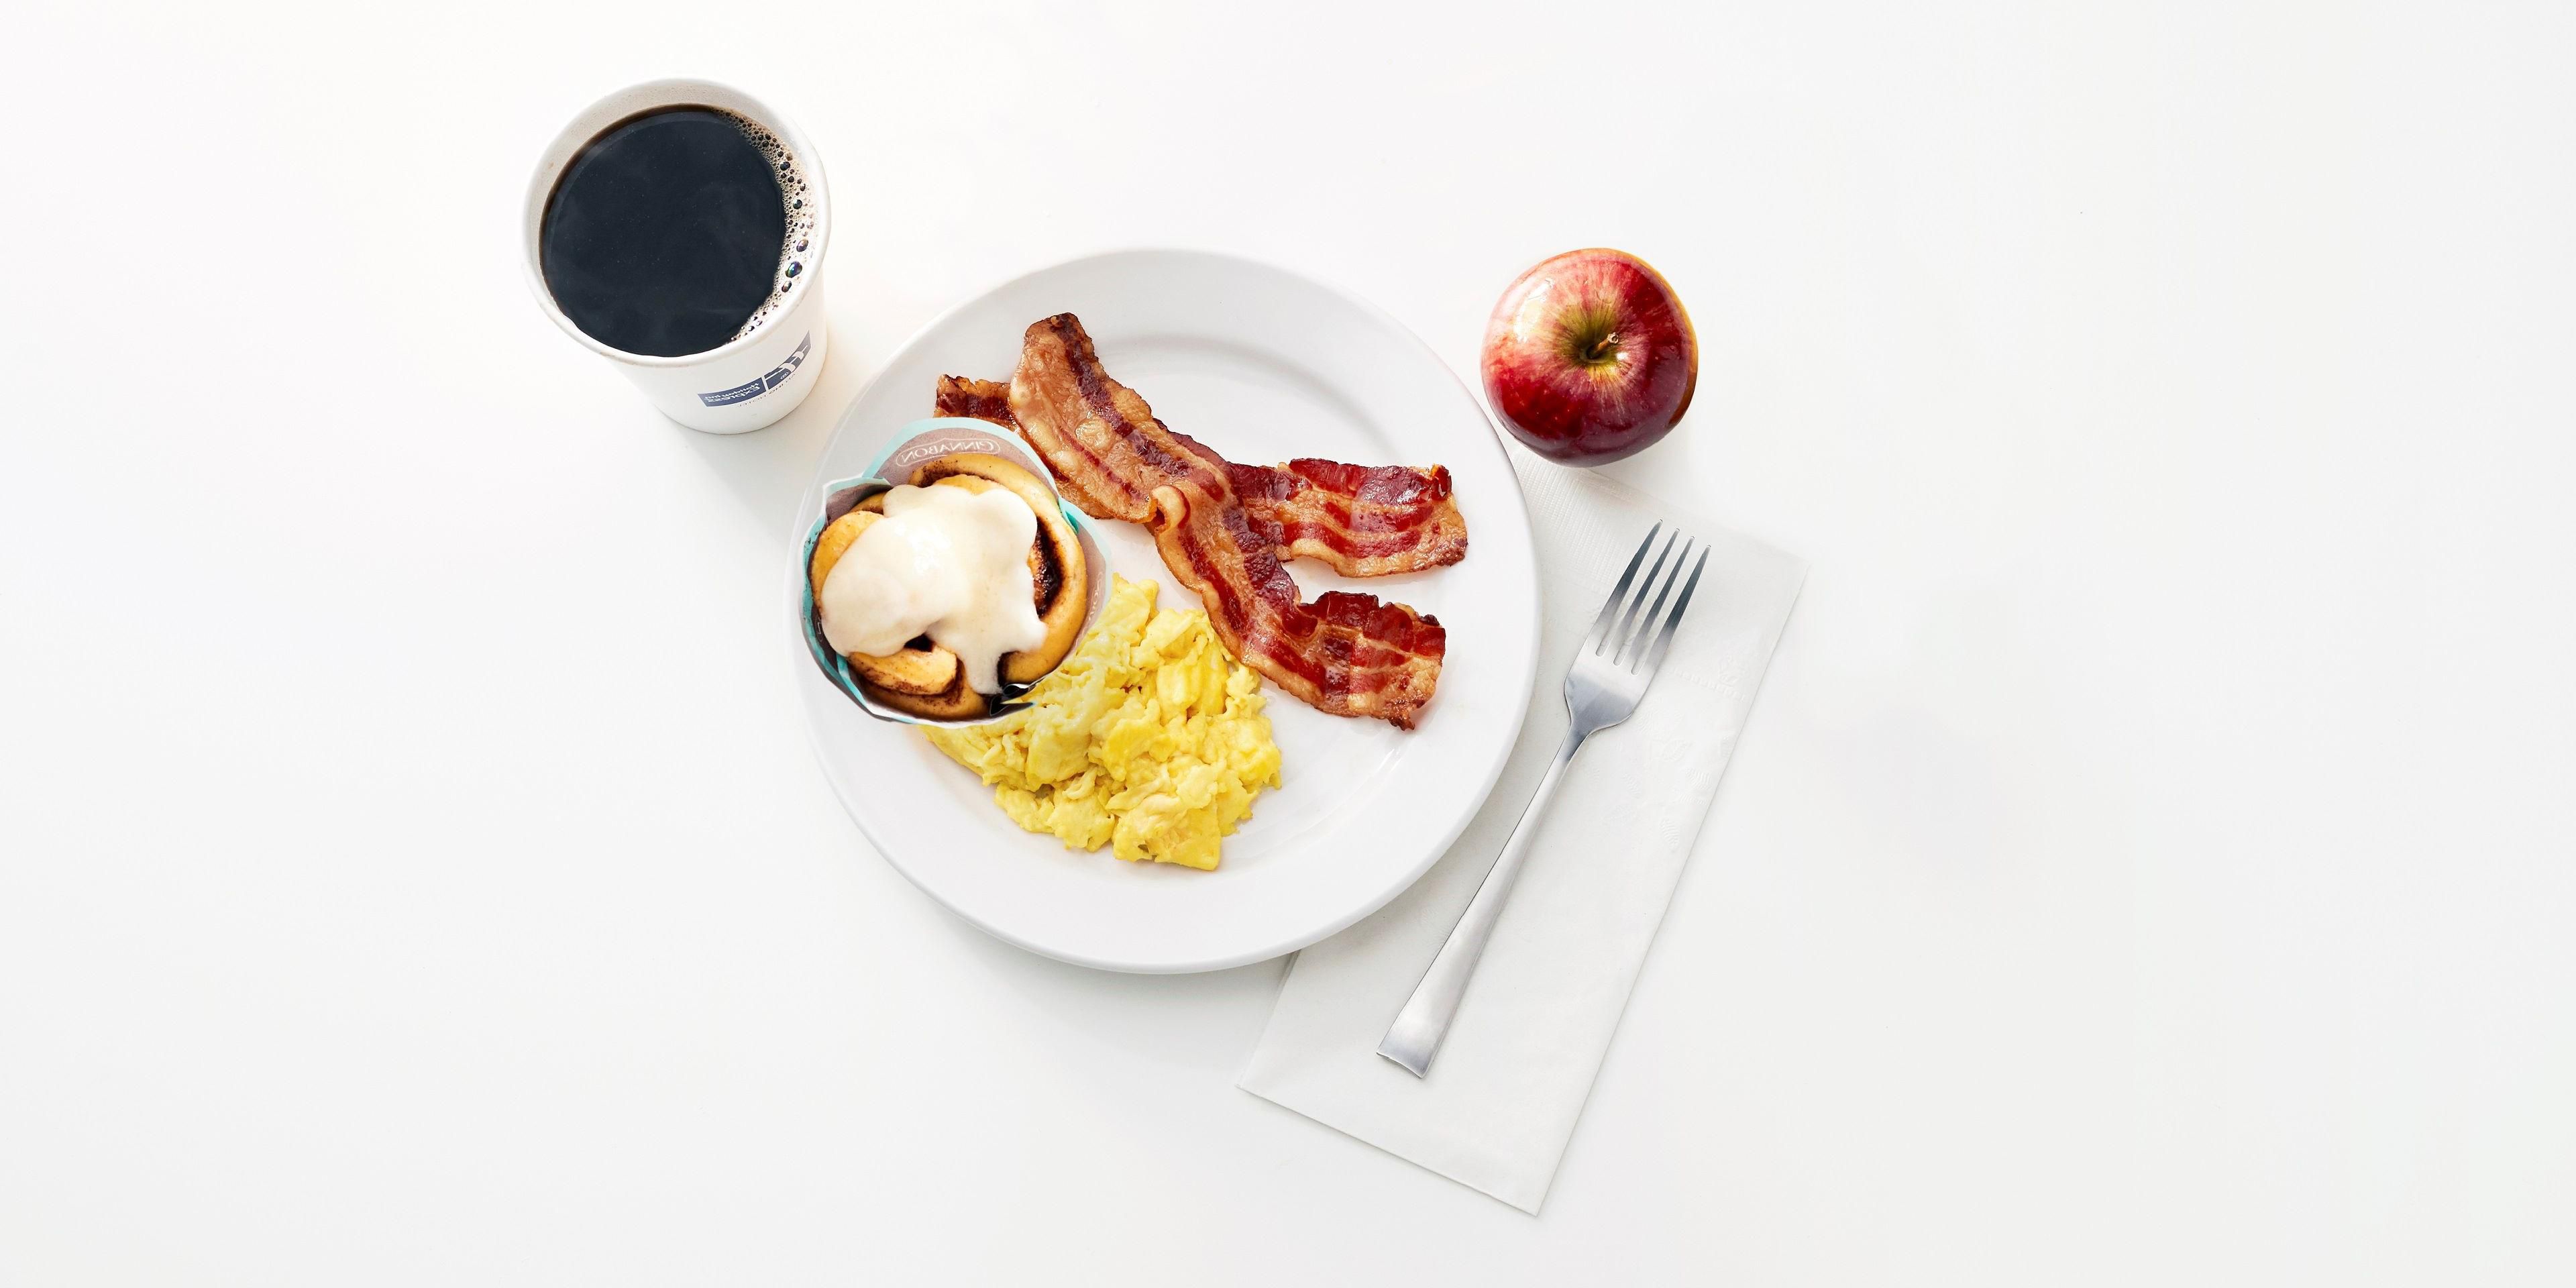 Kick start your day with our free Express Start Breakfast, with grab ‘n’ go options and favorites such as eggs and bacon, hot pancakes, our signature cinnamon rolls and fresh coffee. Offered from Monday to Friday from 6AM to 9:30AM and Saturday and Sunday from 6AM to 10AM.